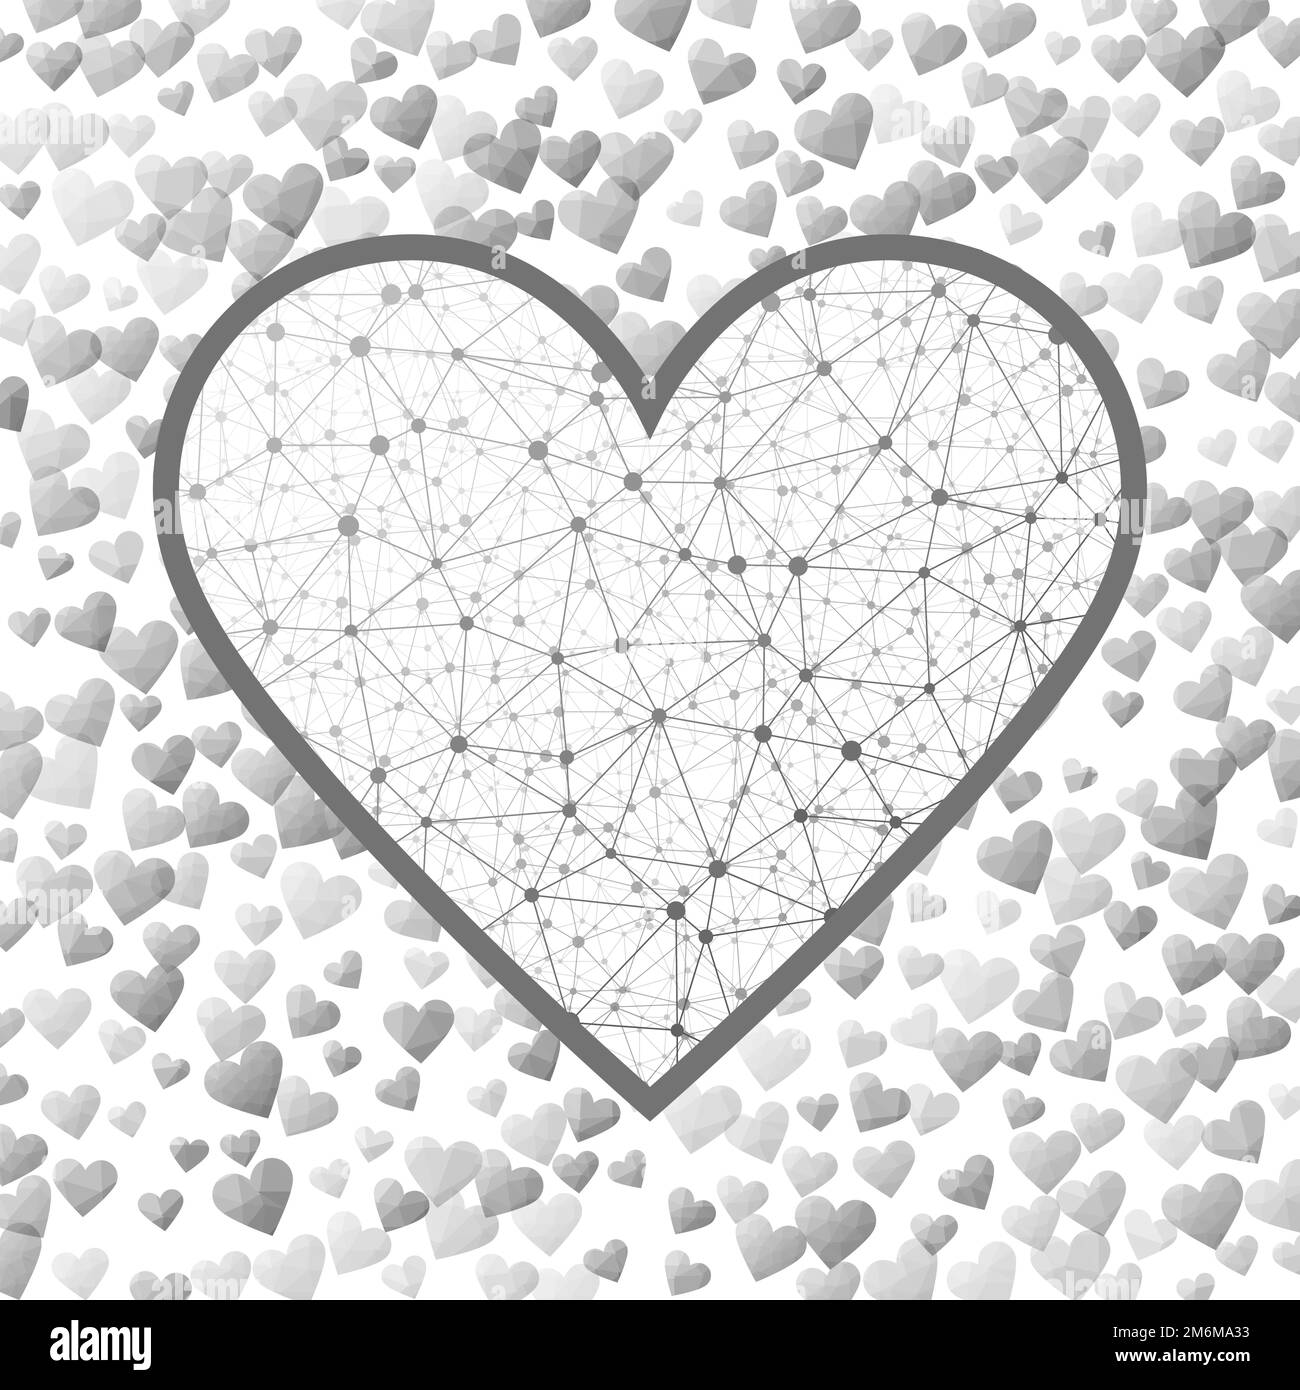 Heart mesh Black and White Stock Photos & Images - Alamy